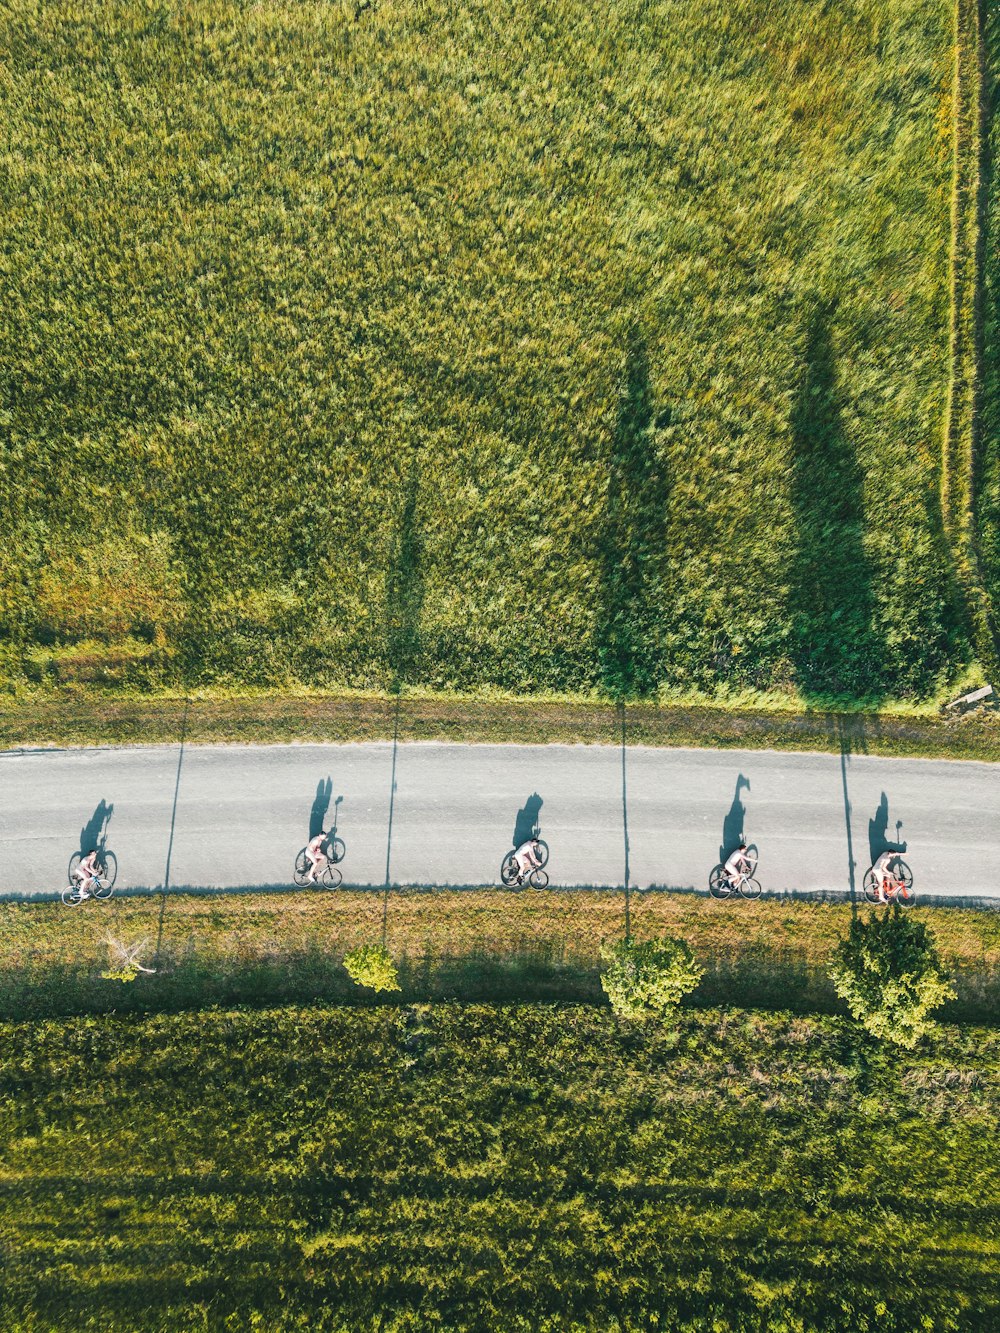 a group of people riding bikes down a road